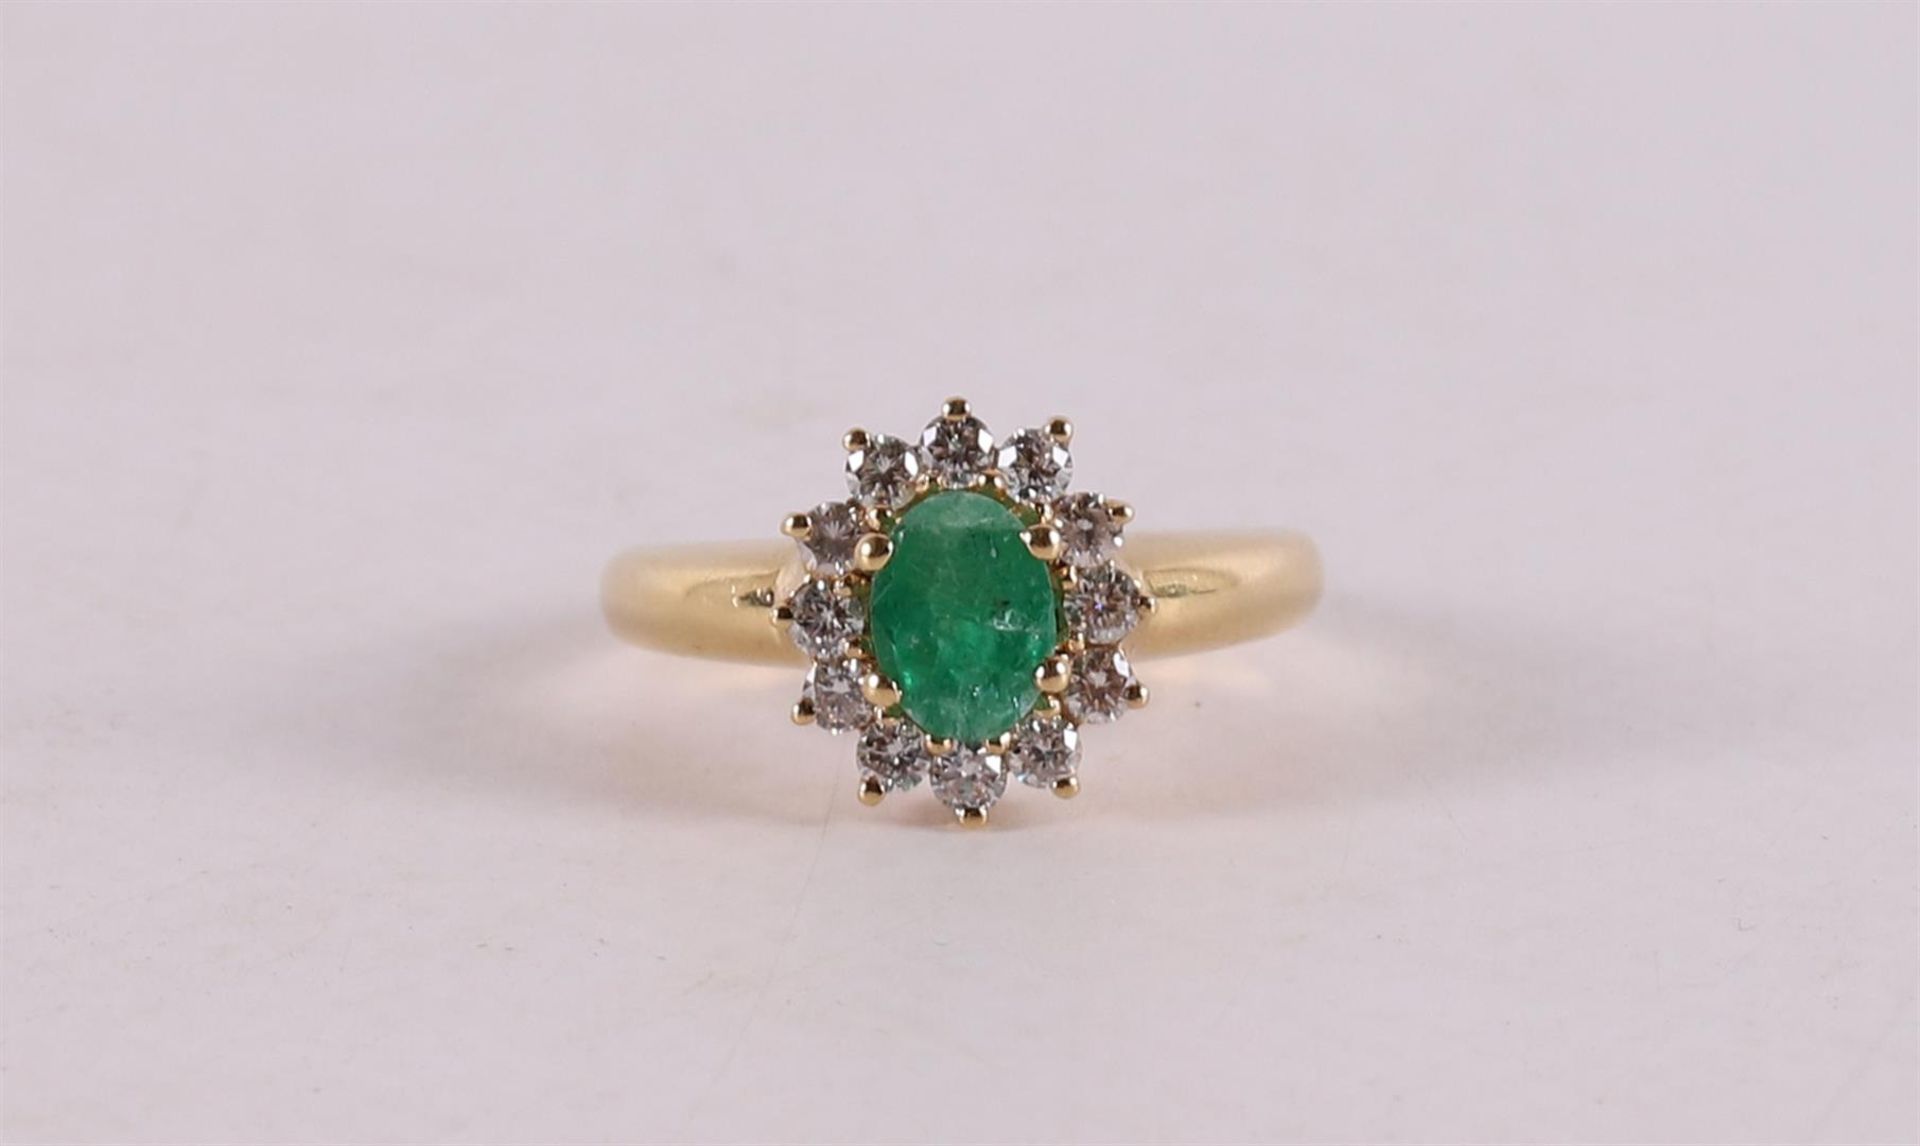 An 18 kt gold ring with an oval facet cut emerald.